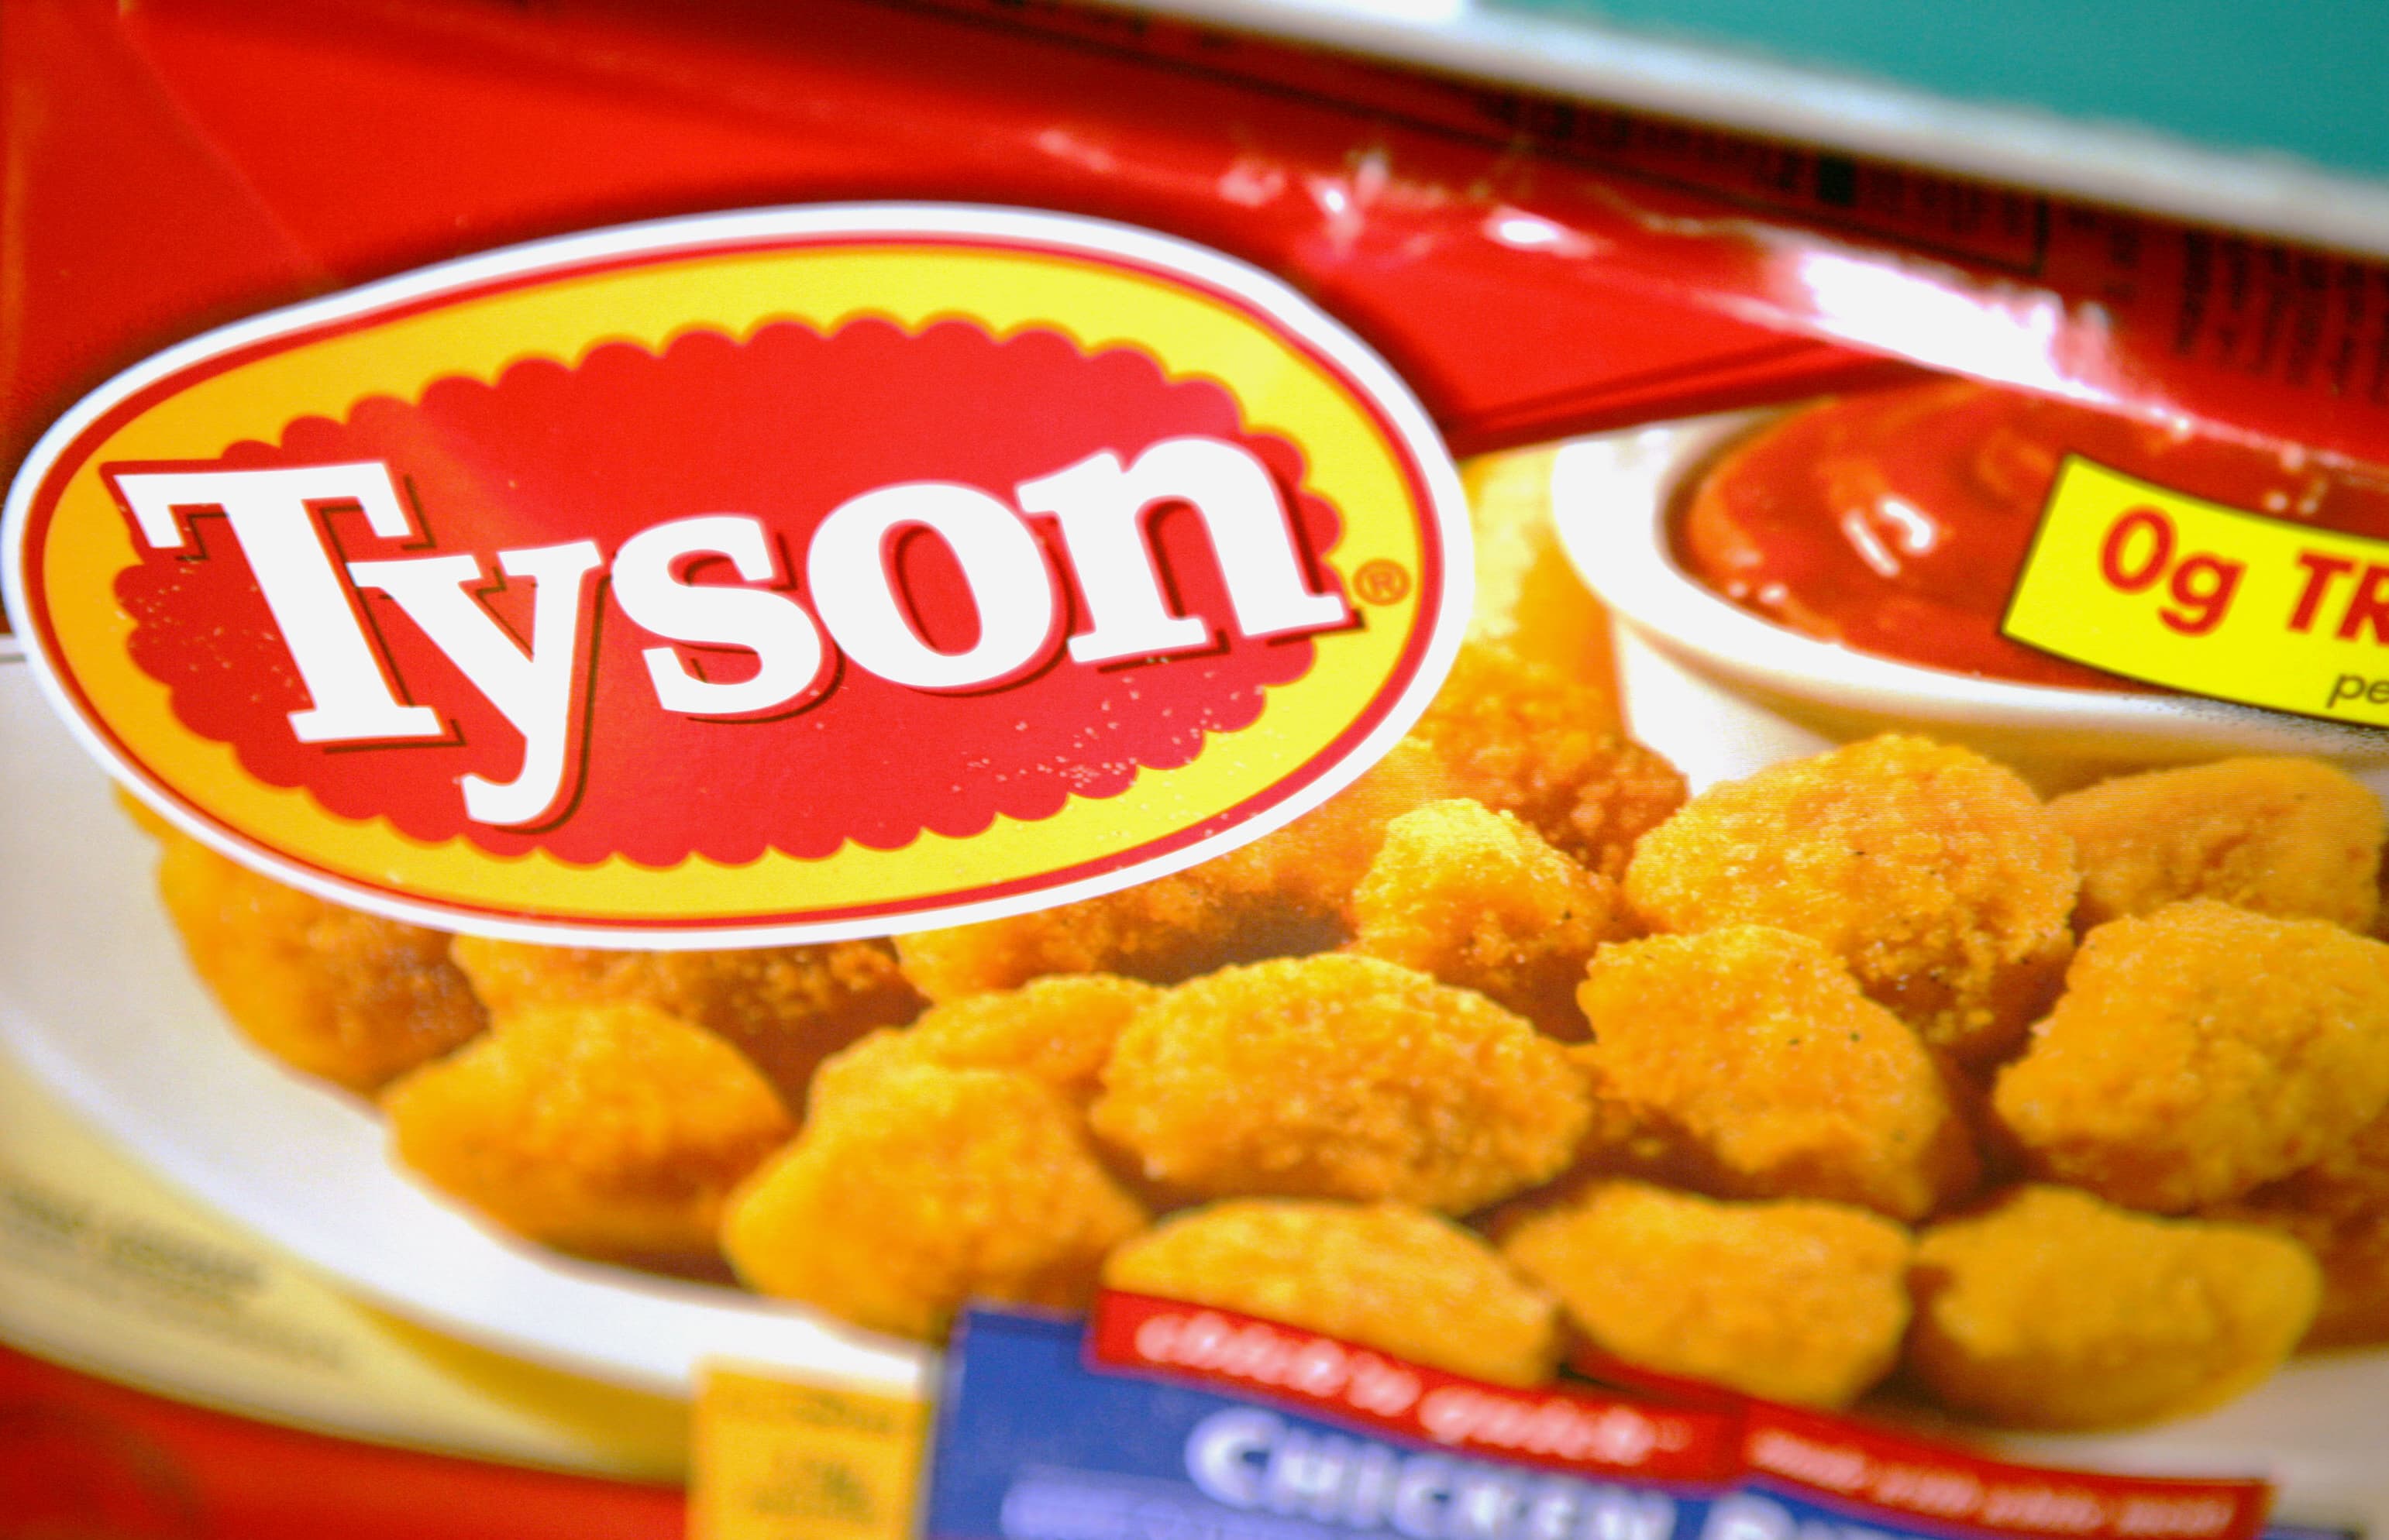 Goldman Sachs downgrades Tyson Foods, says poultry stock trajectory uncertain after latest results